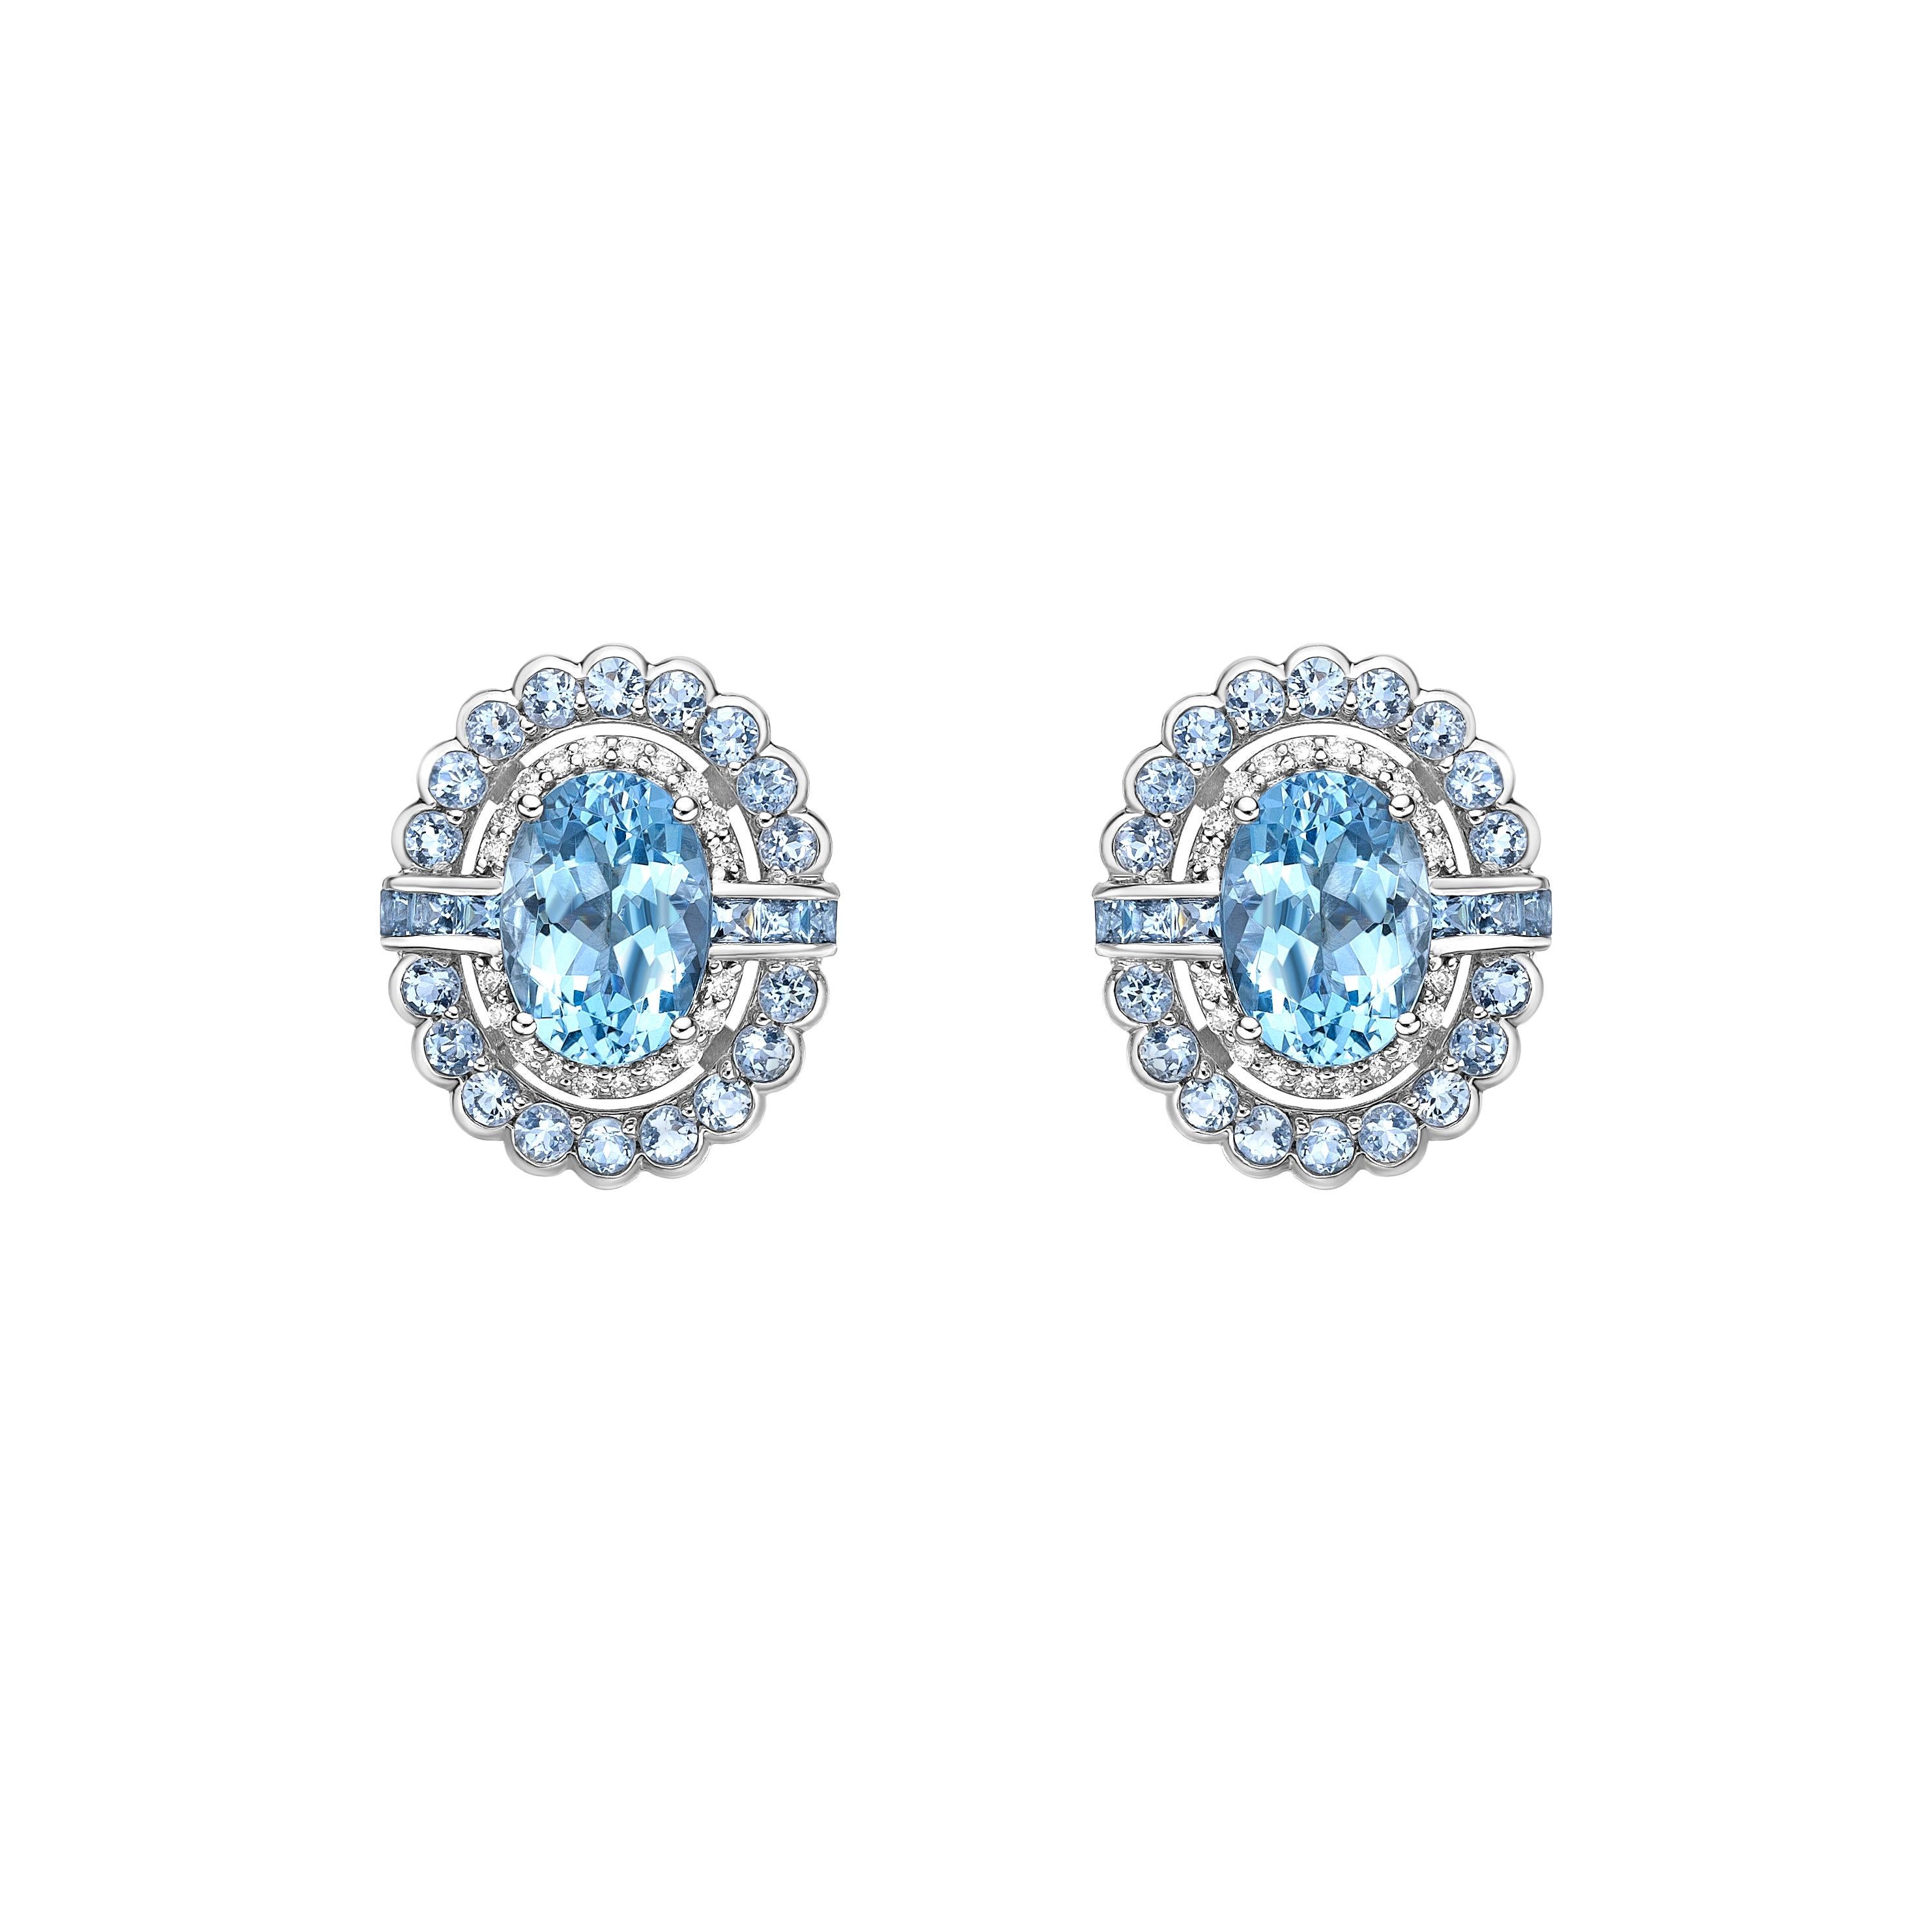 Contemporary Aquamarine Stud Earring with Diamond in 18 Karat White Gold. For Sale